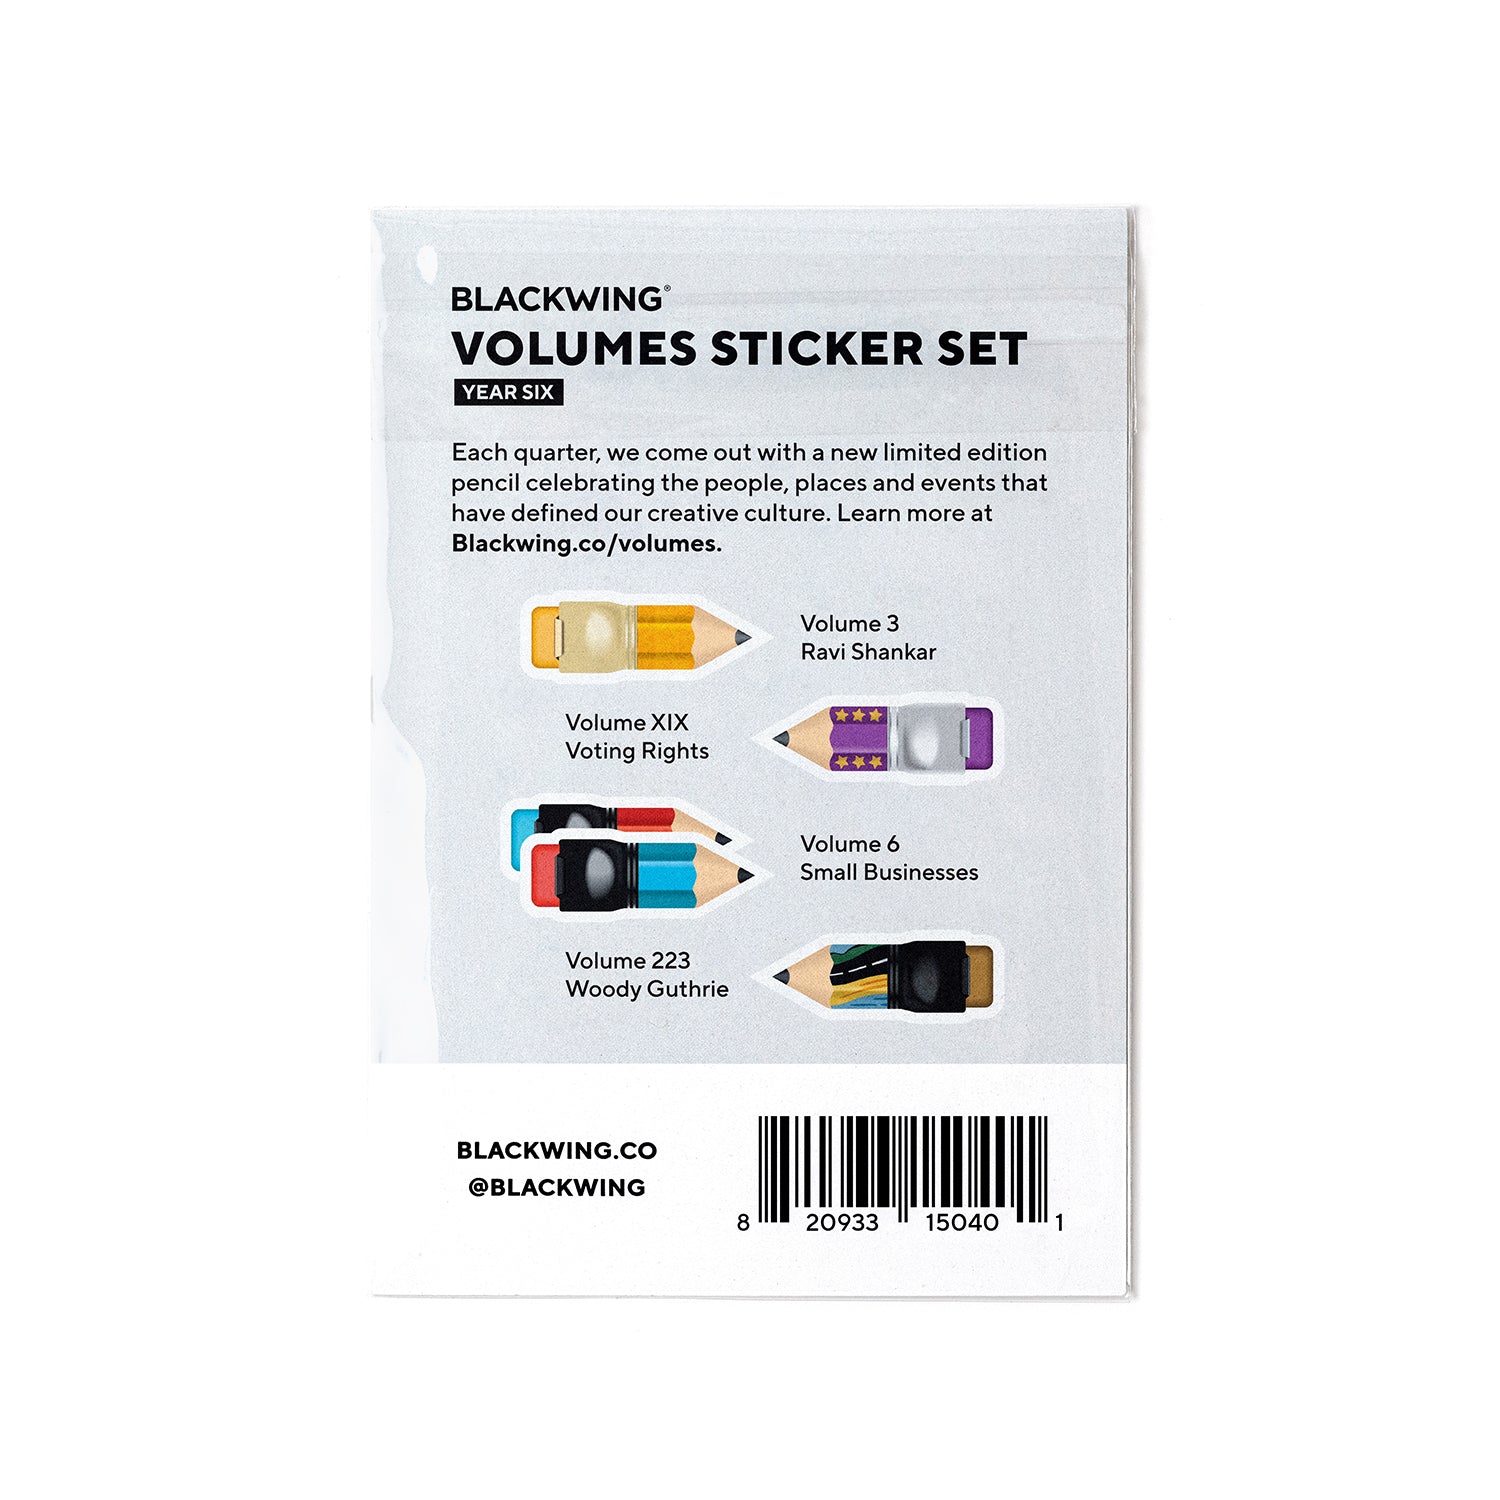 Blackwing Volumes Sticker Set - Year 6 from the limited edition pencil program.